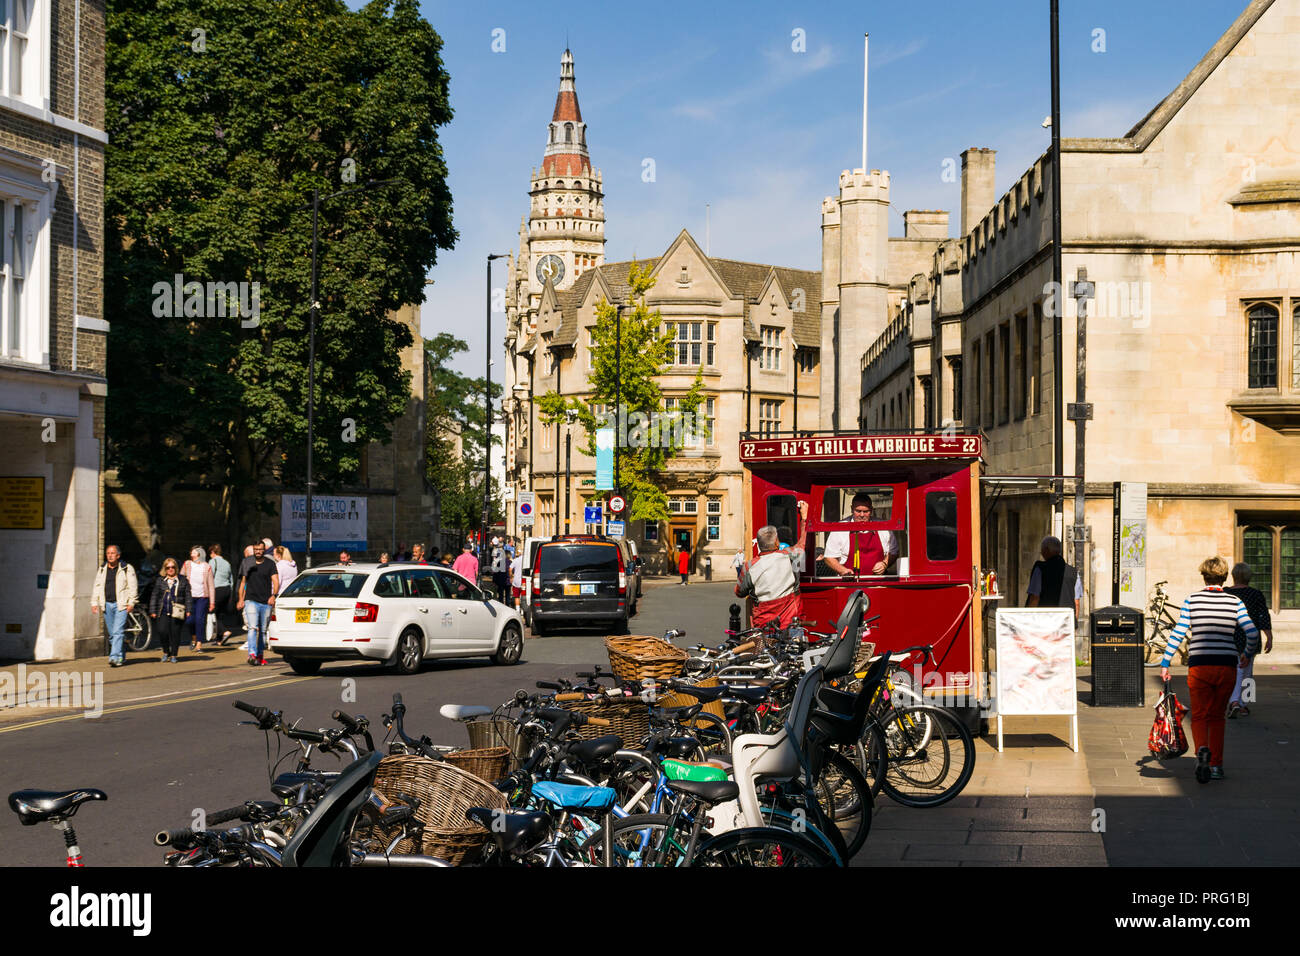 View down St Andrews Street with bicycles parked and people walking around, Cambridge, UK Stock Photo